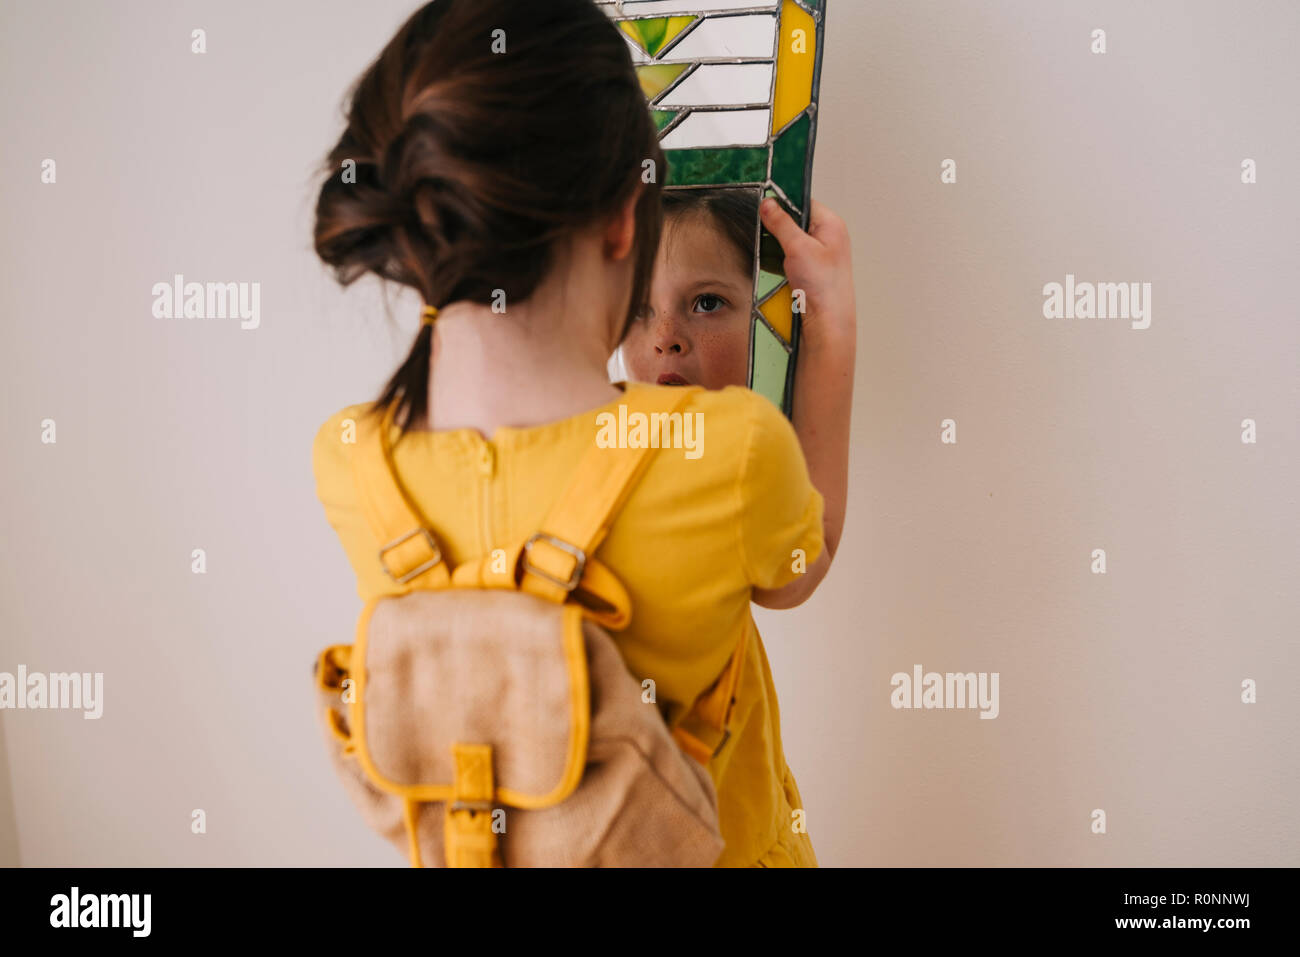 Rear view of a Girl looking at her reflection in a mirror Stock Photo